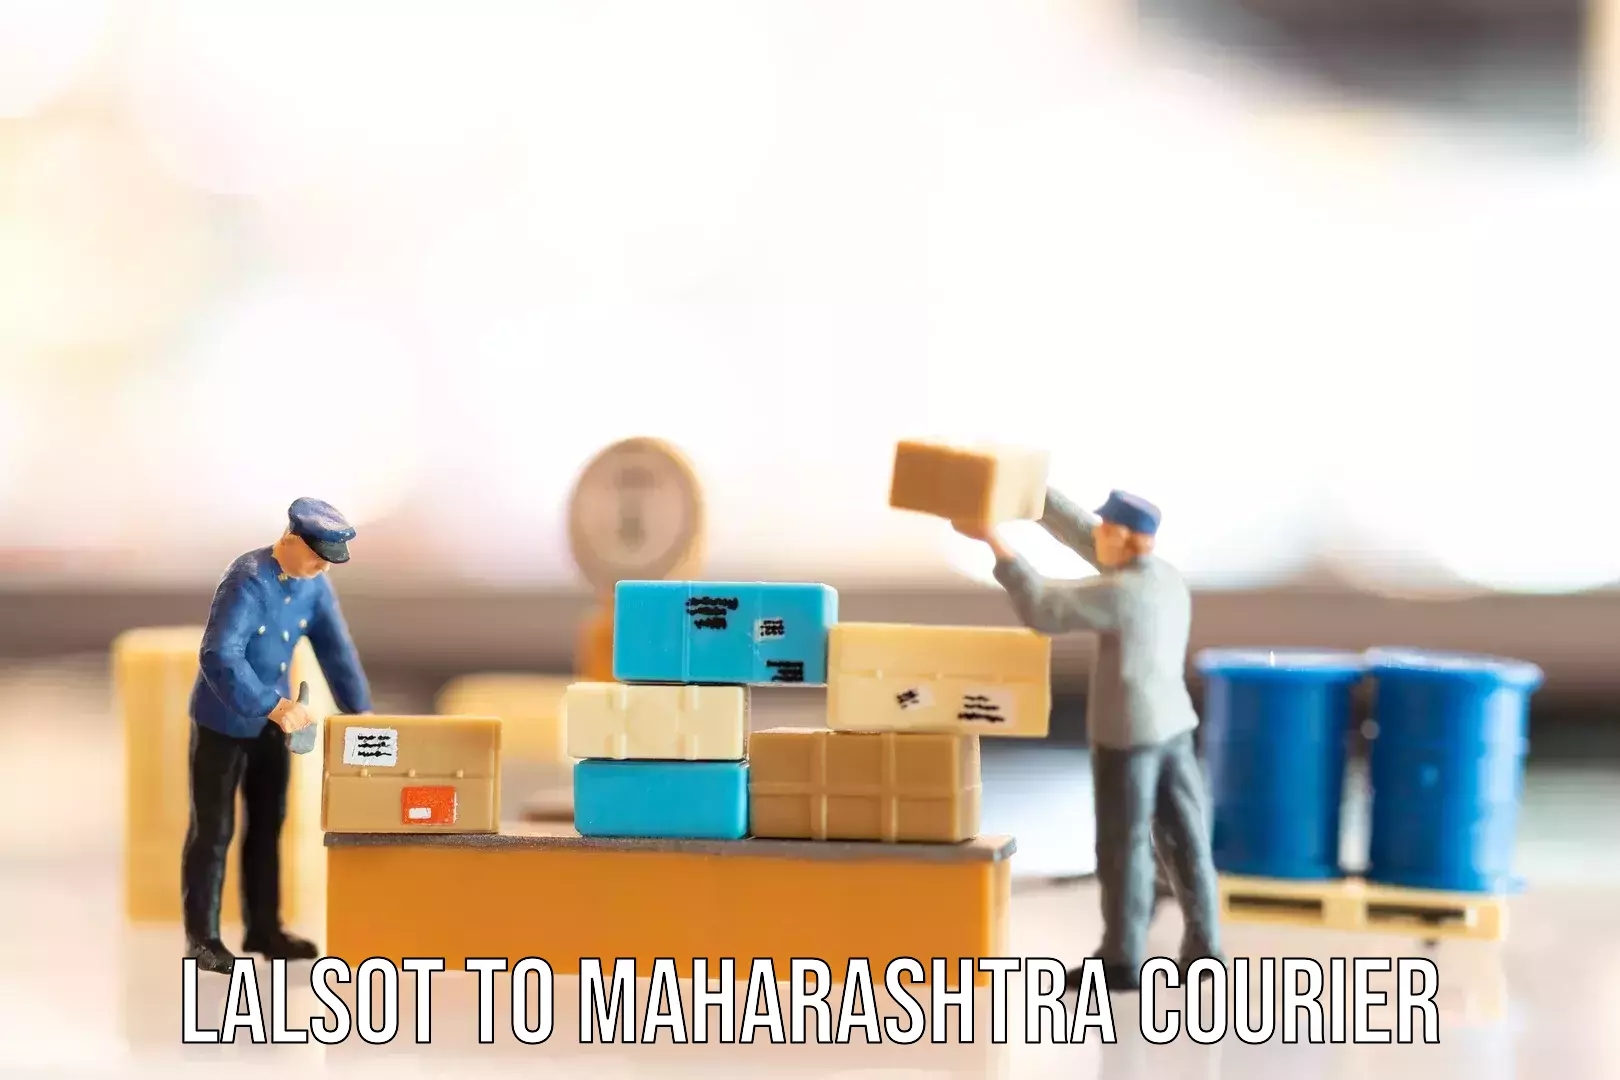 Luggage dispatch service Lalsot to Maharashtra